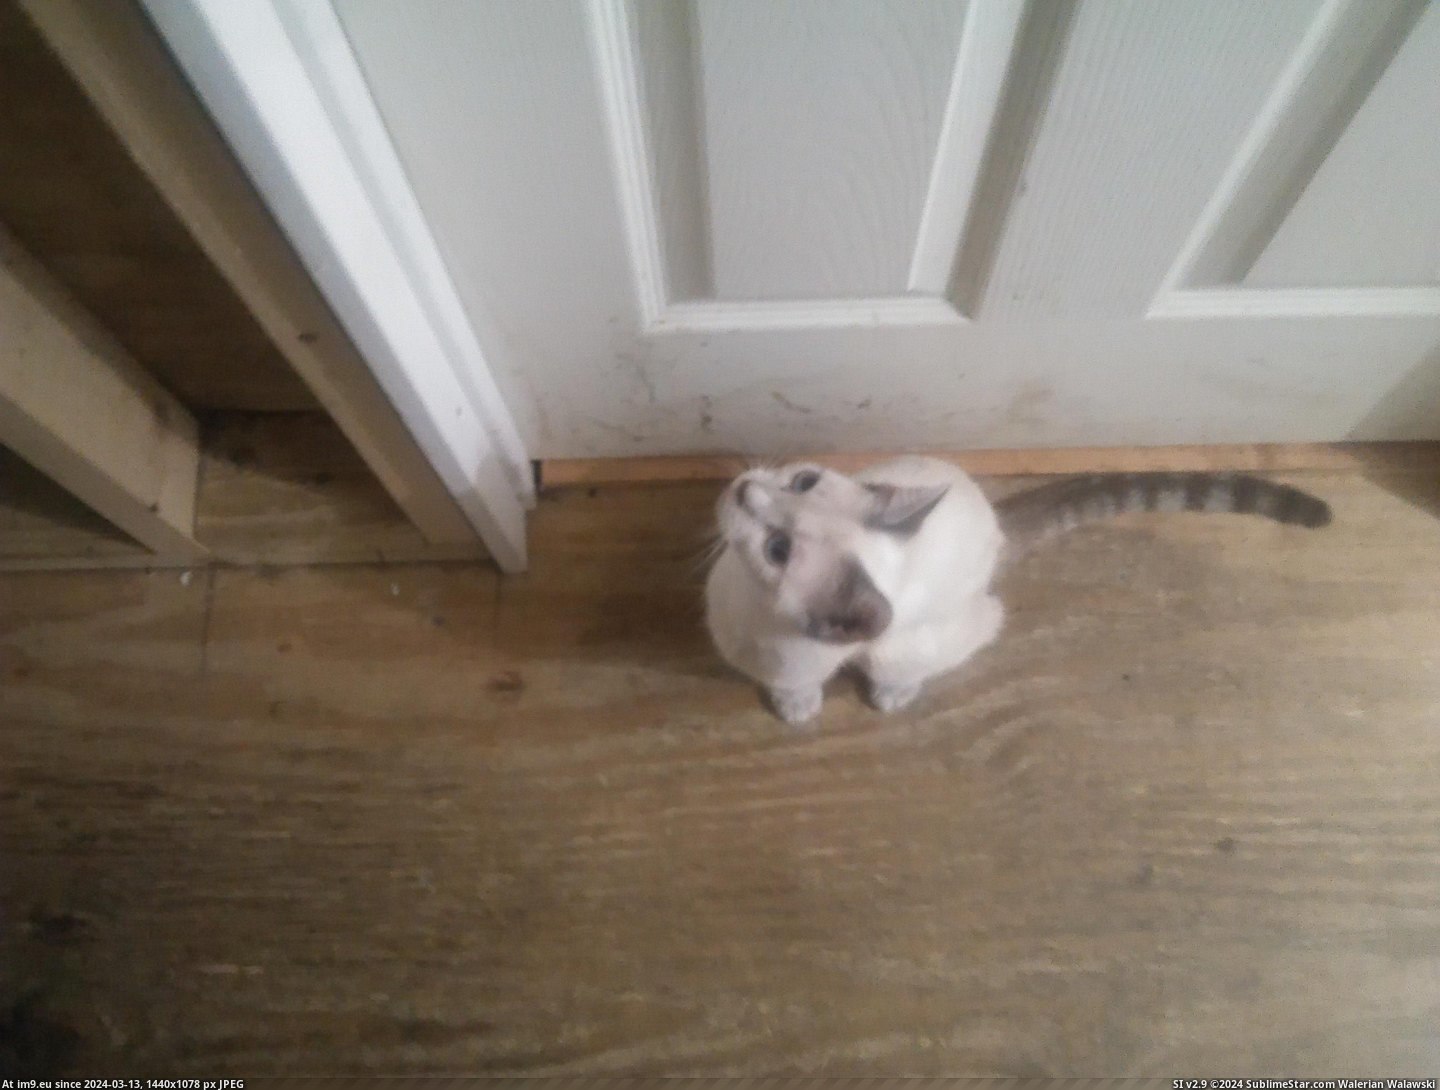 #Cats #Likes #Door #Stretching #Meowing #Sitting #Bedroom #Snowy [Cats] Snowy likes sitting outside of my bedroom door, meowing and stretching at the door until I open the door 5 Pic. (Bild von album My r/CATS favs))